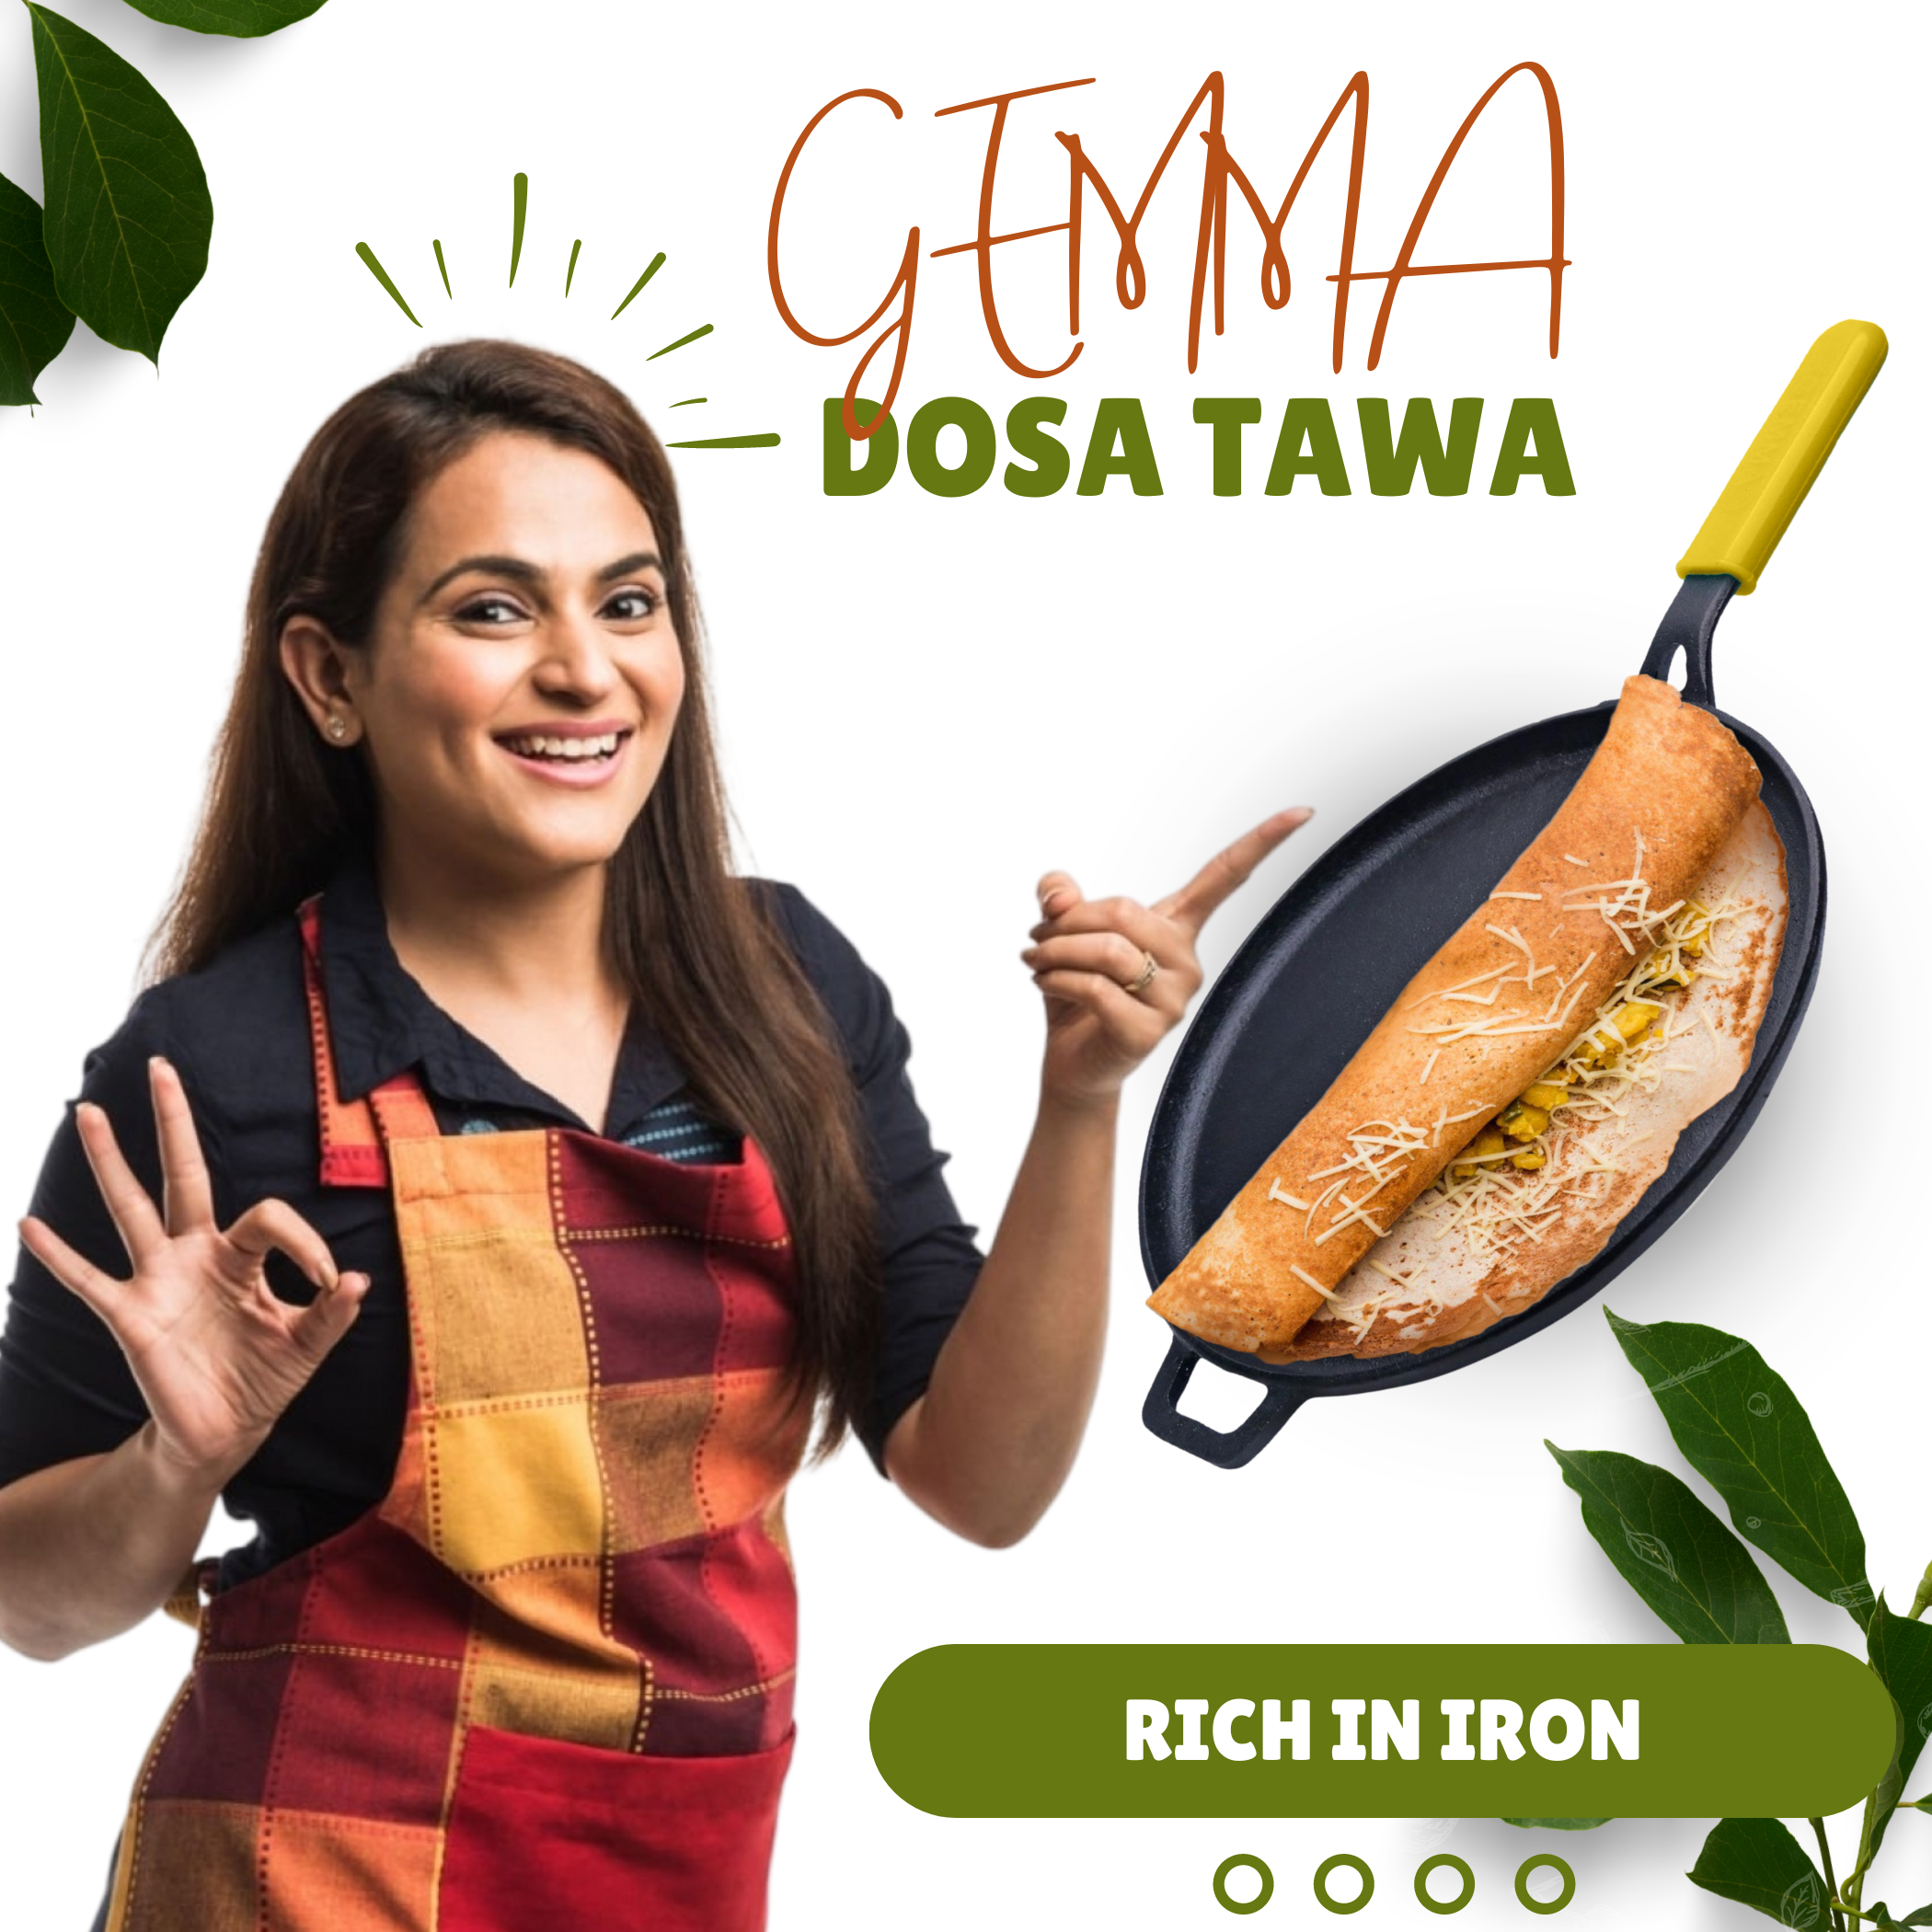 Pre-Seasoned Natural Nonstick Raw Cast Iron Dosa Tawa with Silicone Grip Yellow